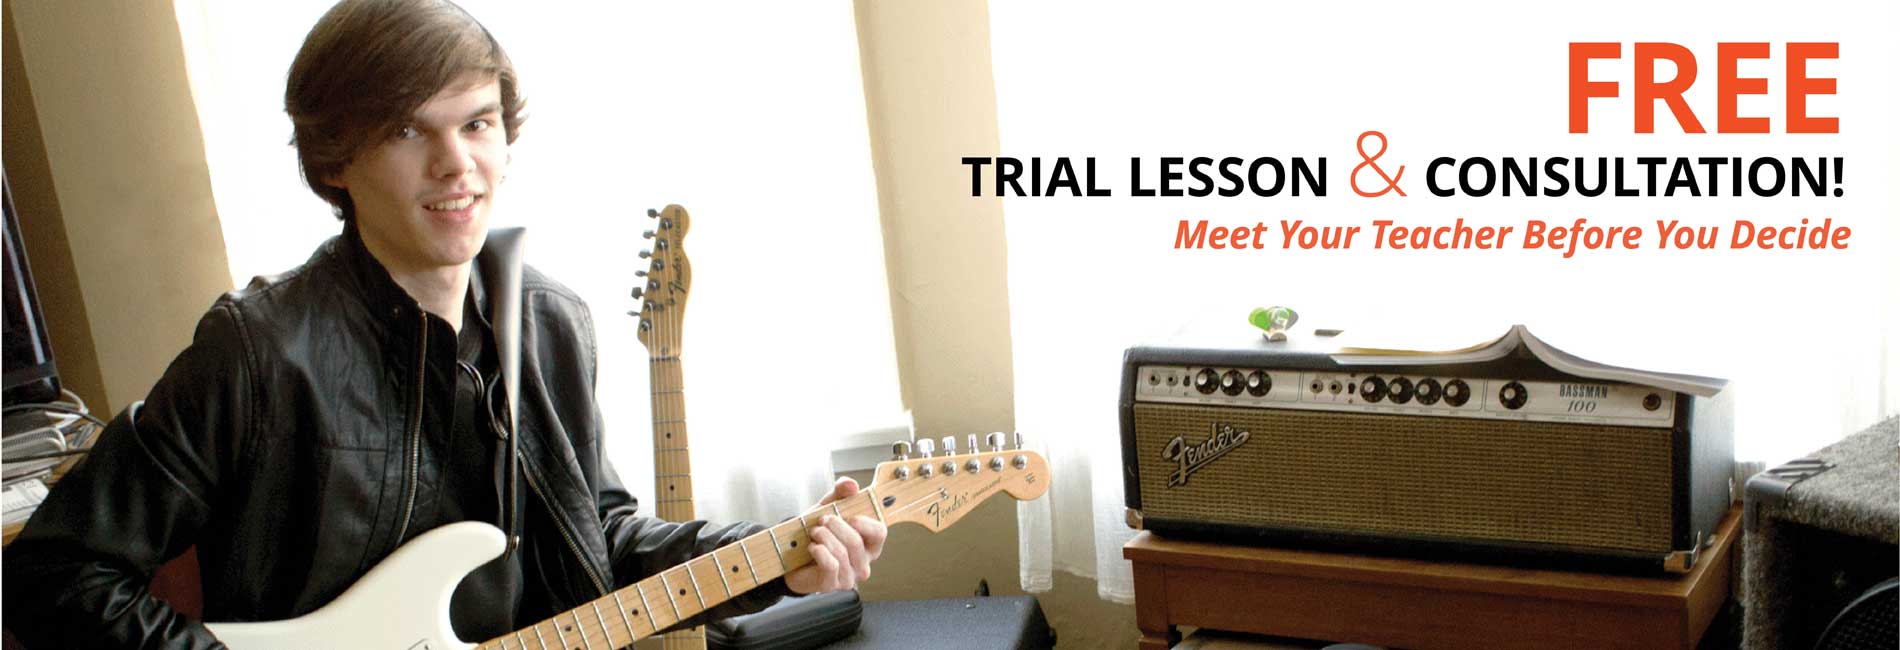 Free Trial Lesson and Consultation